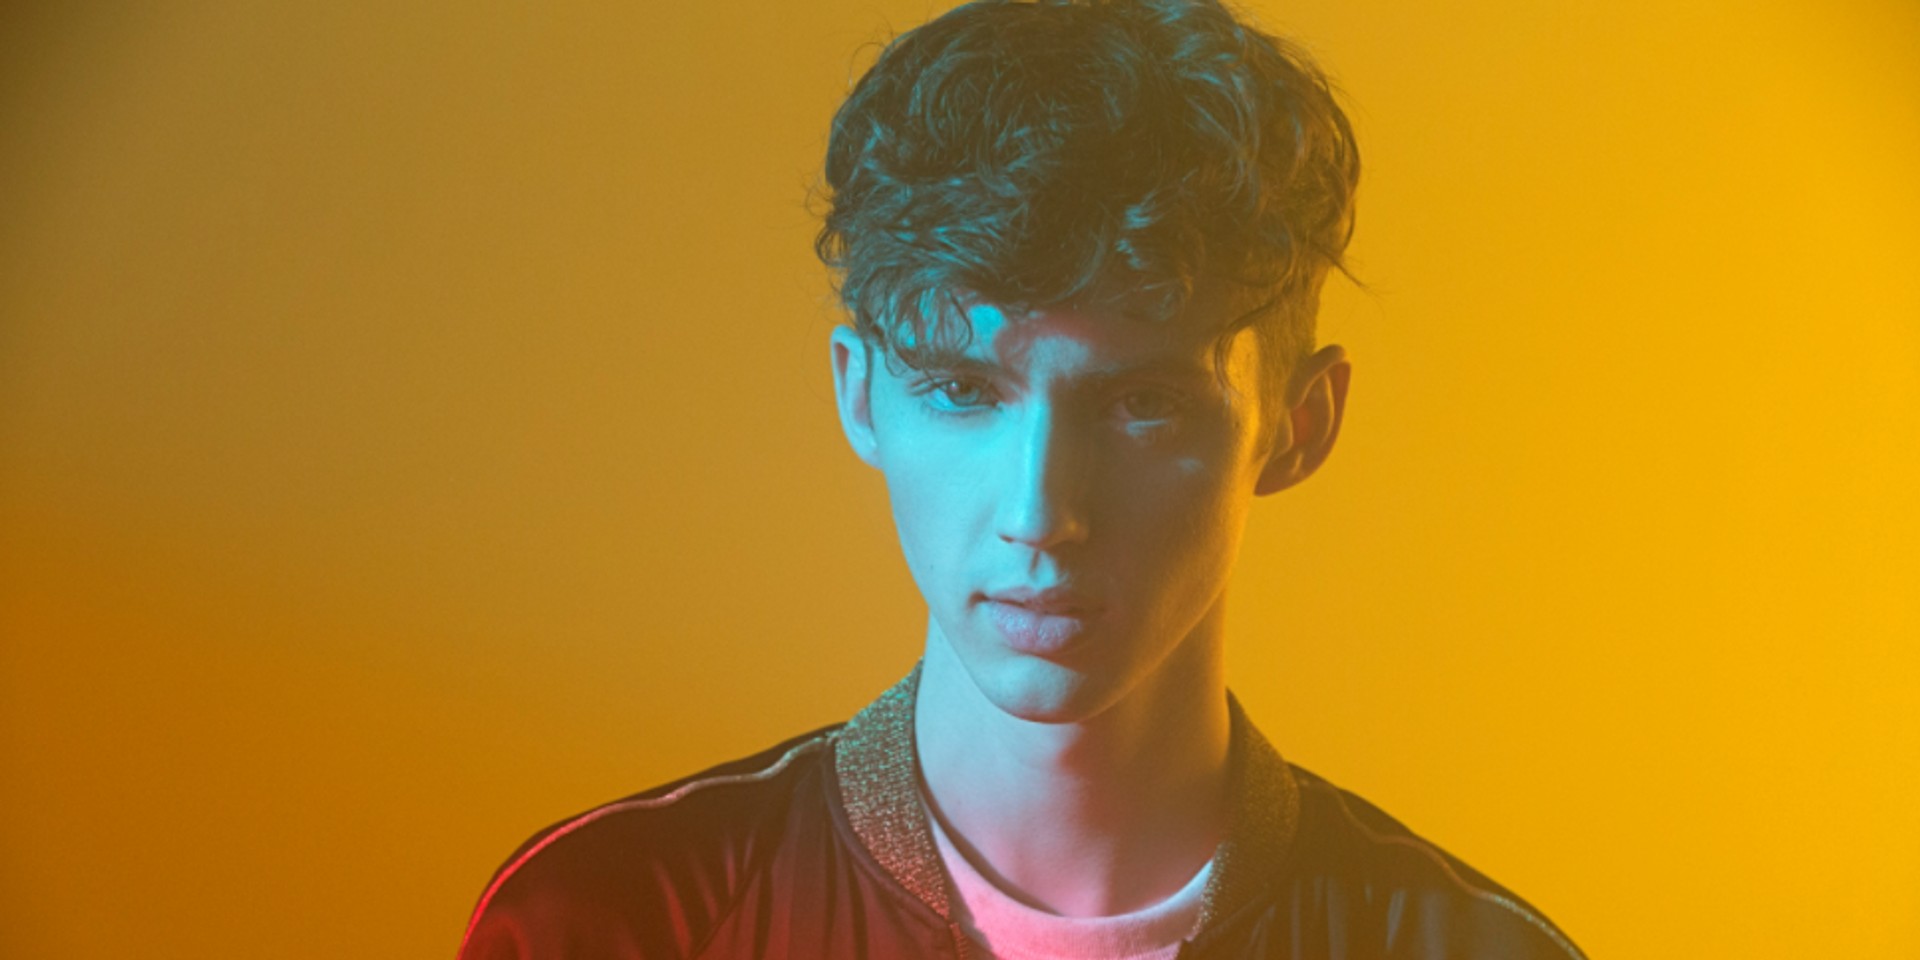 Troye Sivan reportedly spotted at local Manila mall, fans have collective meltdown online